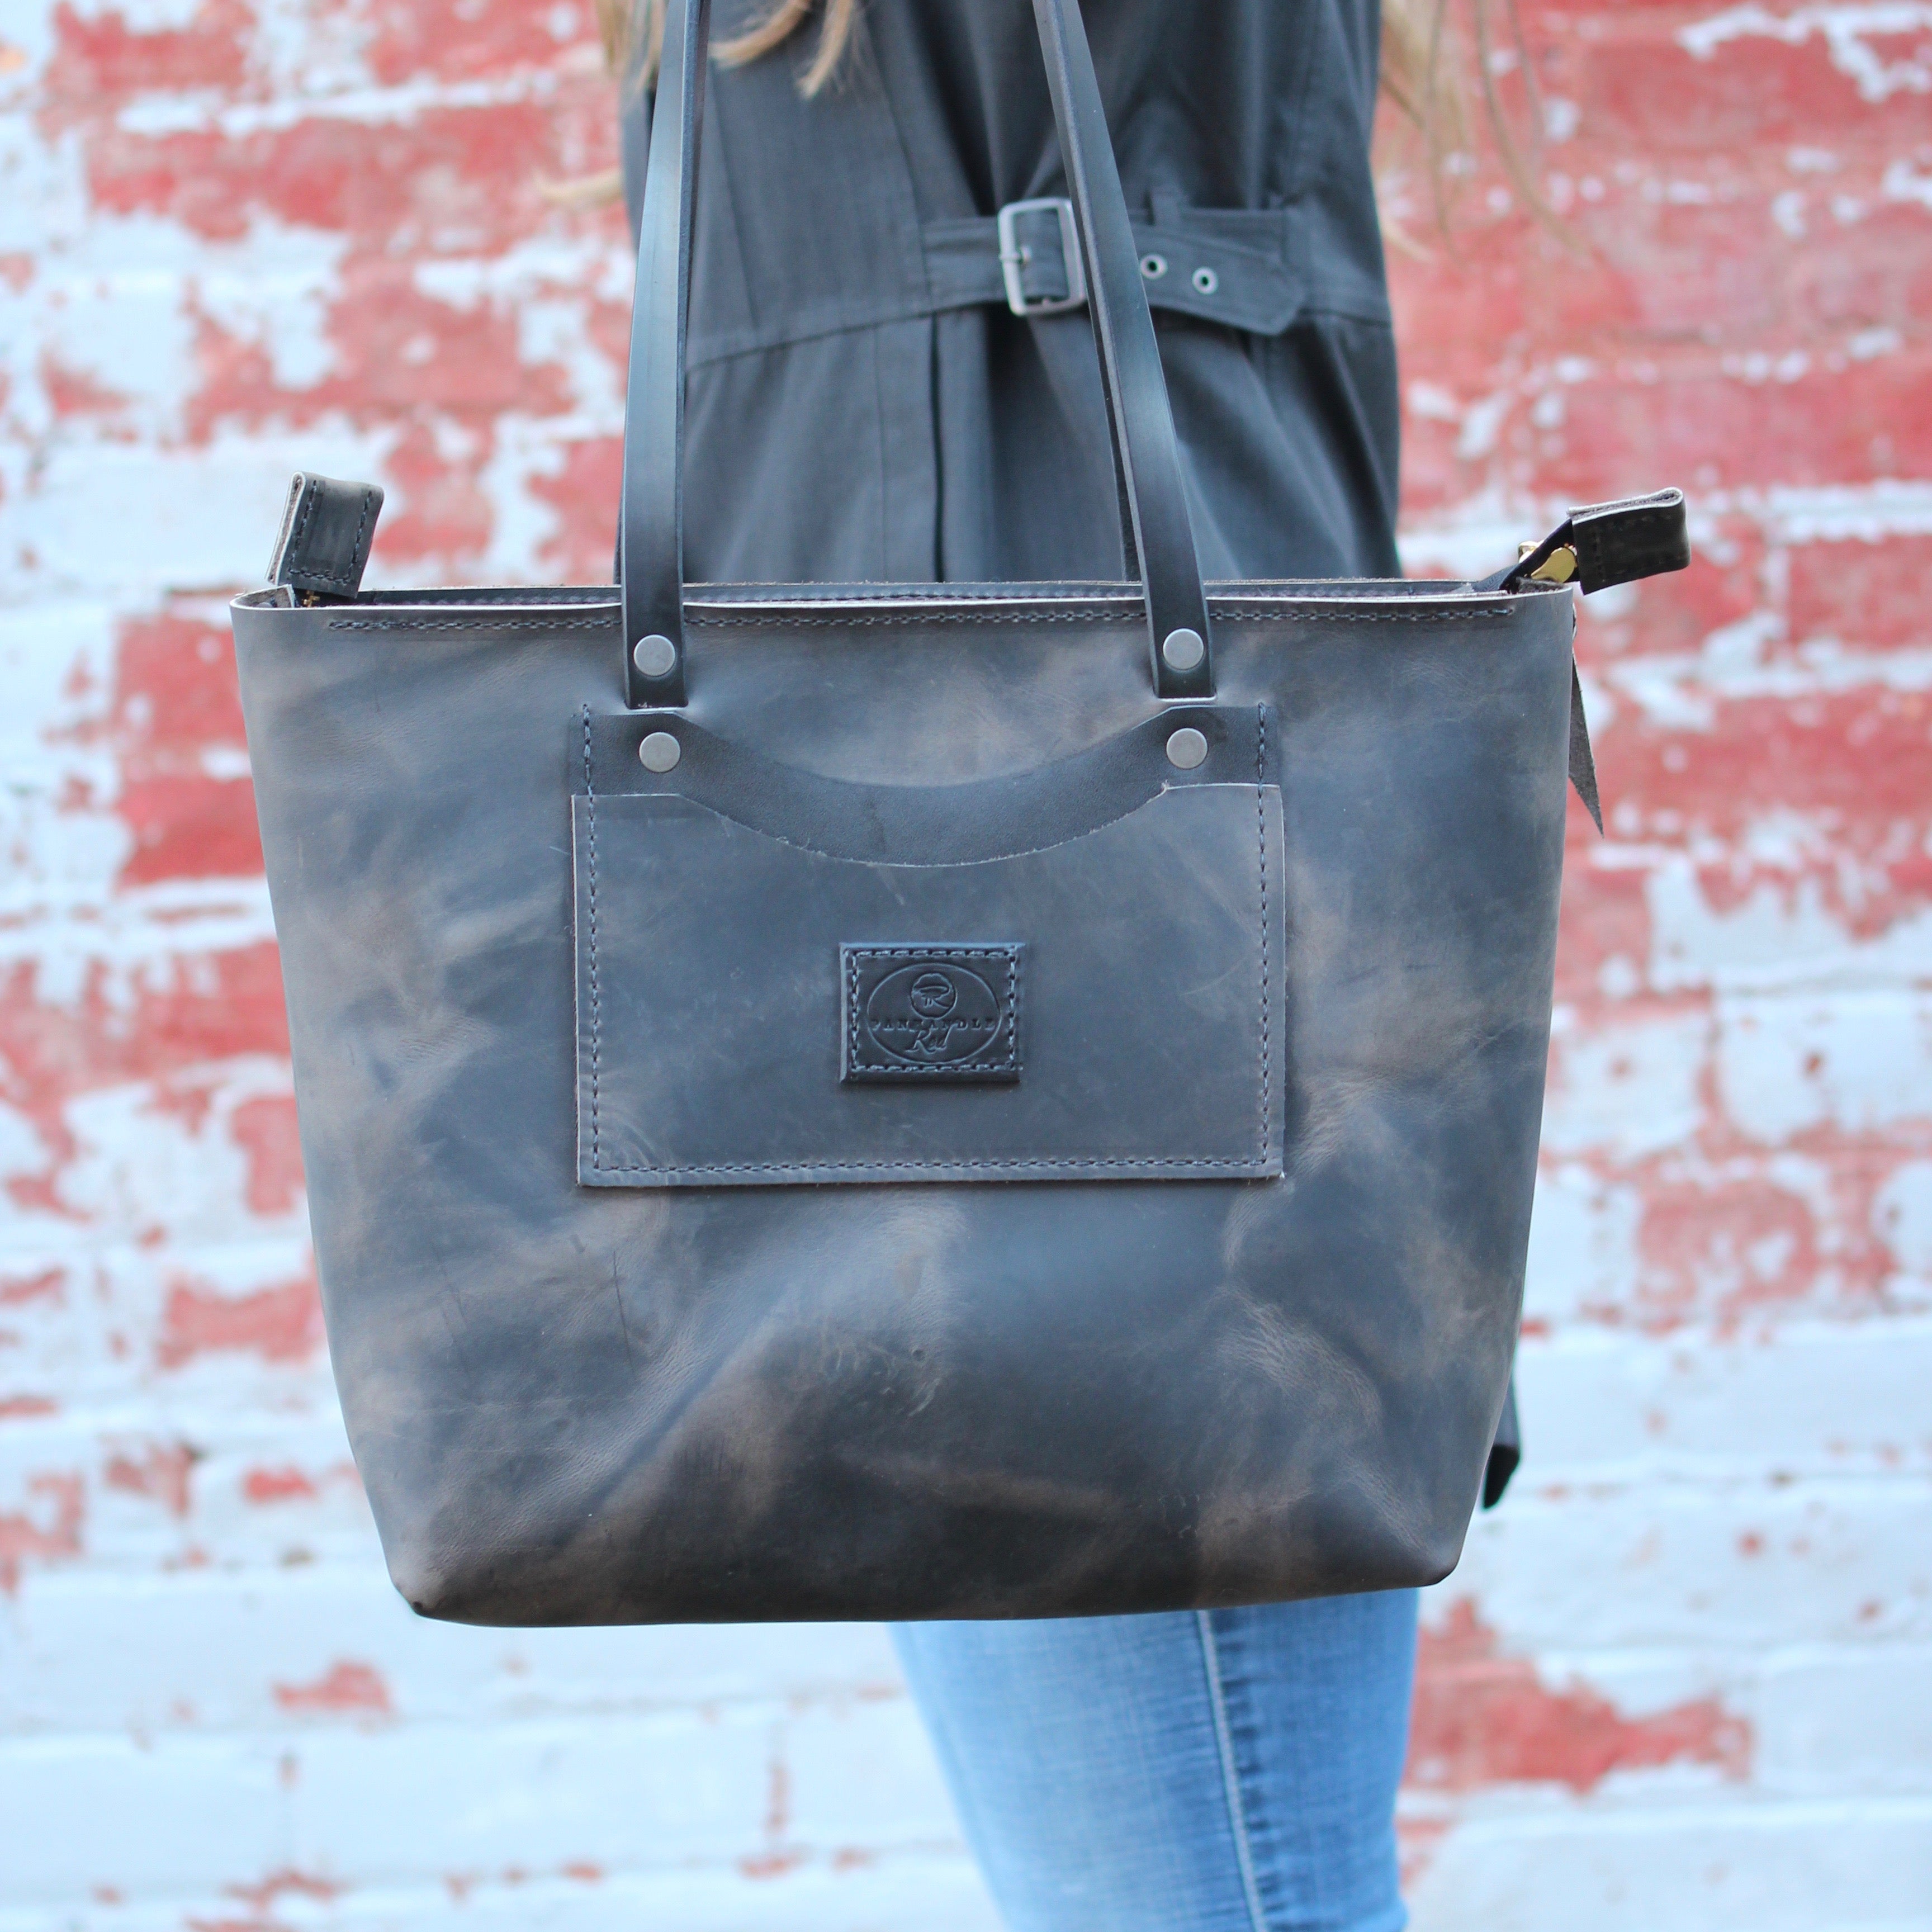 Grey Leather Tote Bag with a zipper, grey leather tote bag, Panhandle Red Company Leather Goods, Handbags, Totes, Purses, Everyday Carry Needs, and more. Full-grain leather items, custom gifts, handcrafted gifts, leather products